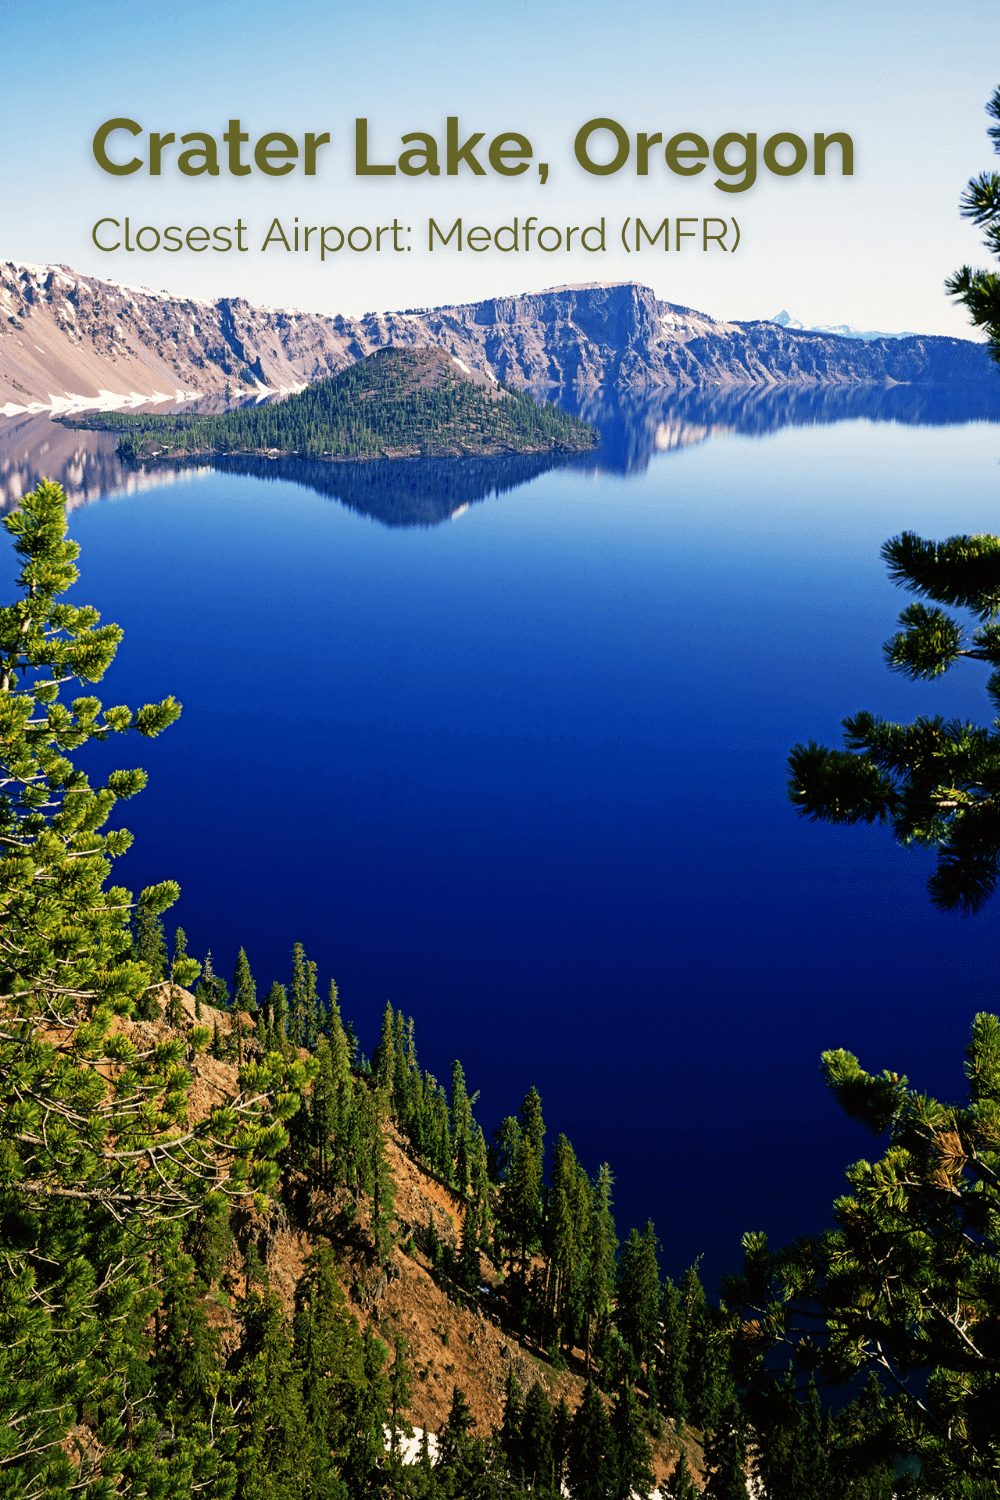 This photo depicts the rich blue water of Crater Lake in Oregon.  There is an island in the middle of the lake with a forest of green fir trees while the rocky ridge of the imploded volcano rises up to frame in this shot. 